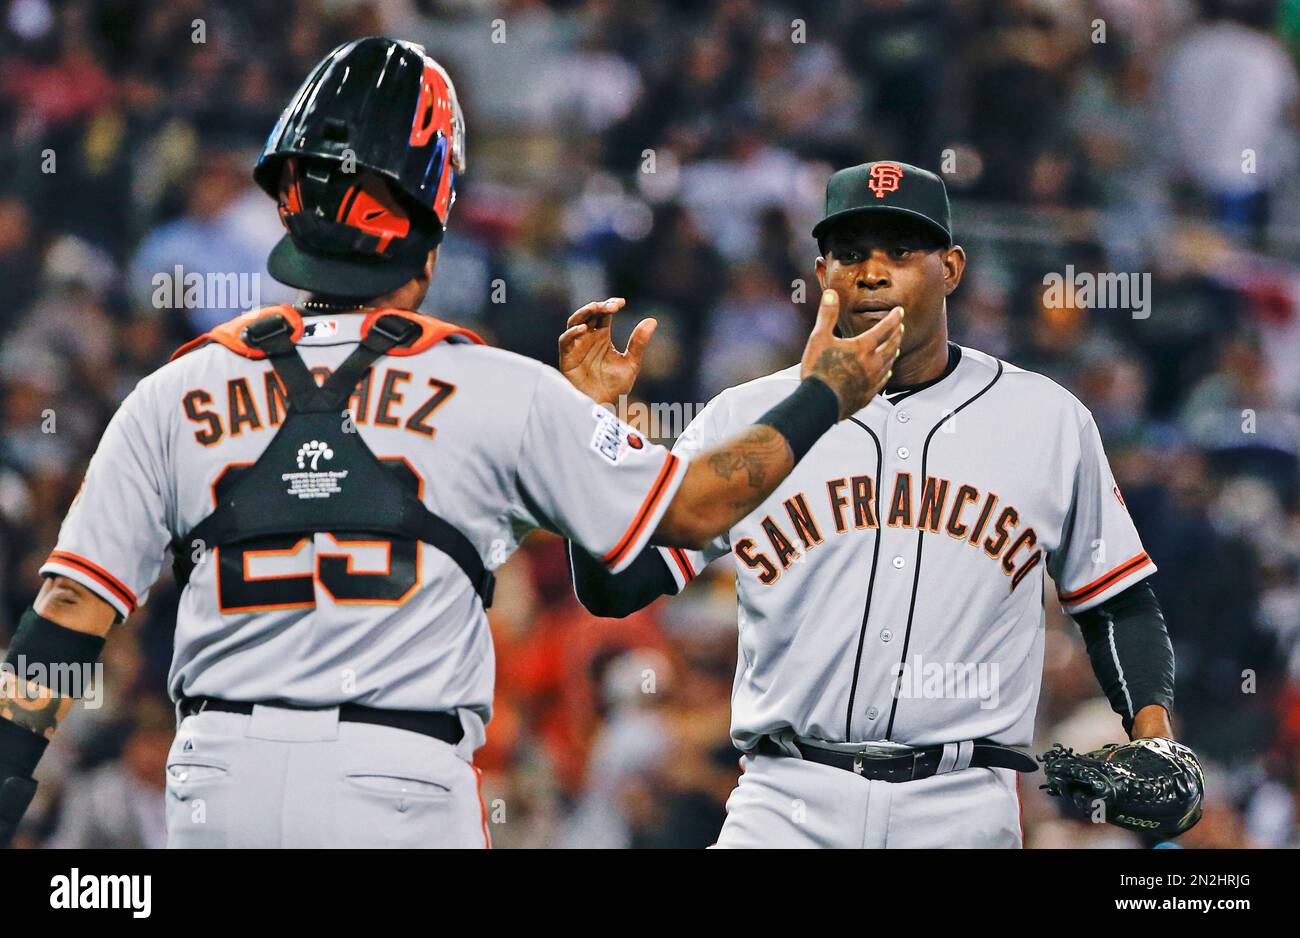 San Francisco Giants closer Santiago Casilla, right, is congratulated by  catcher Hector Sanchez after the Giants' 1-0 victory over the San Diego  Padres in 12 innings in a baseball game Thursday, April